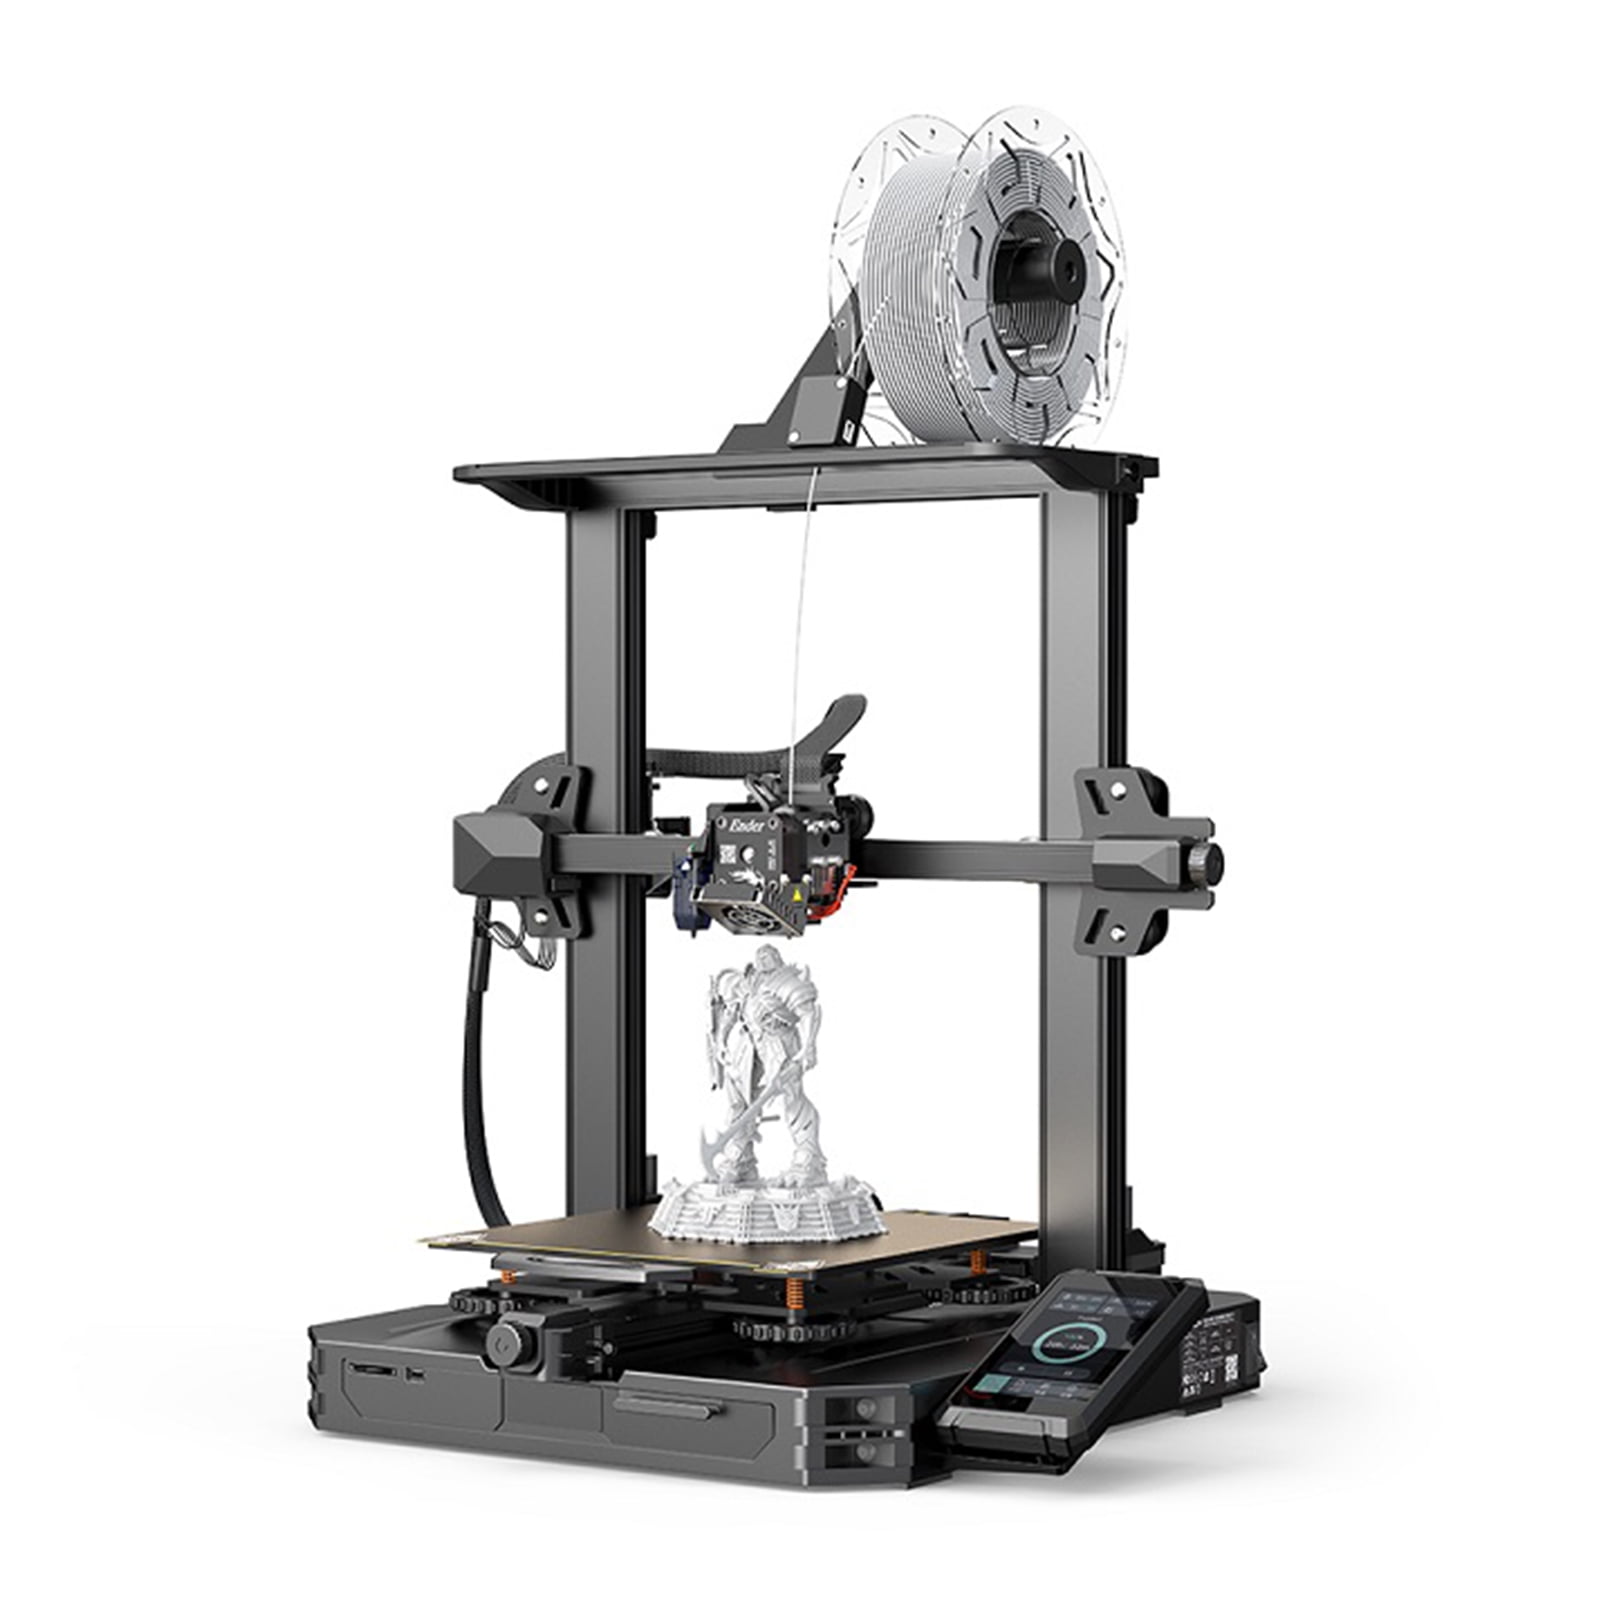 Lånte halvkugle Tilbagebetale Creality 3D Printer Ender 3 S1 Pro, Upgrade from Ender 3 S1 with 300℃  High-Temperature Nozzle, LED Light, PEI Spring Printing Plateform and  4.3inch Touchscreen, Printing Size 8.6X8.6X10.6in - Walmart.com